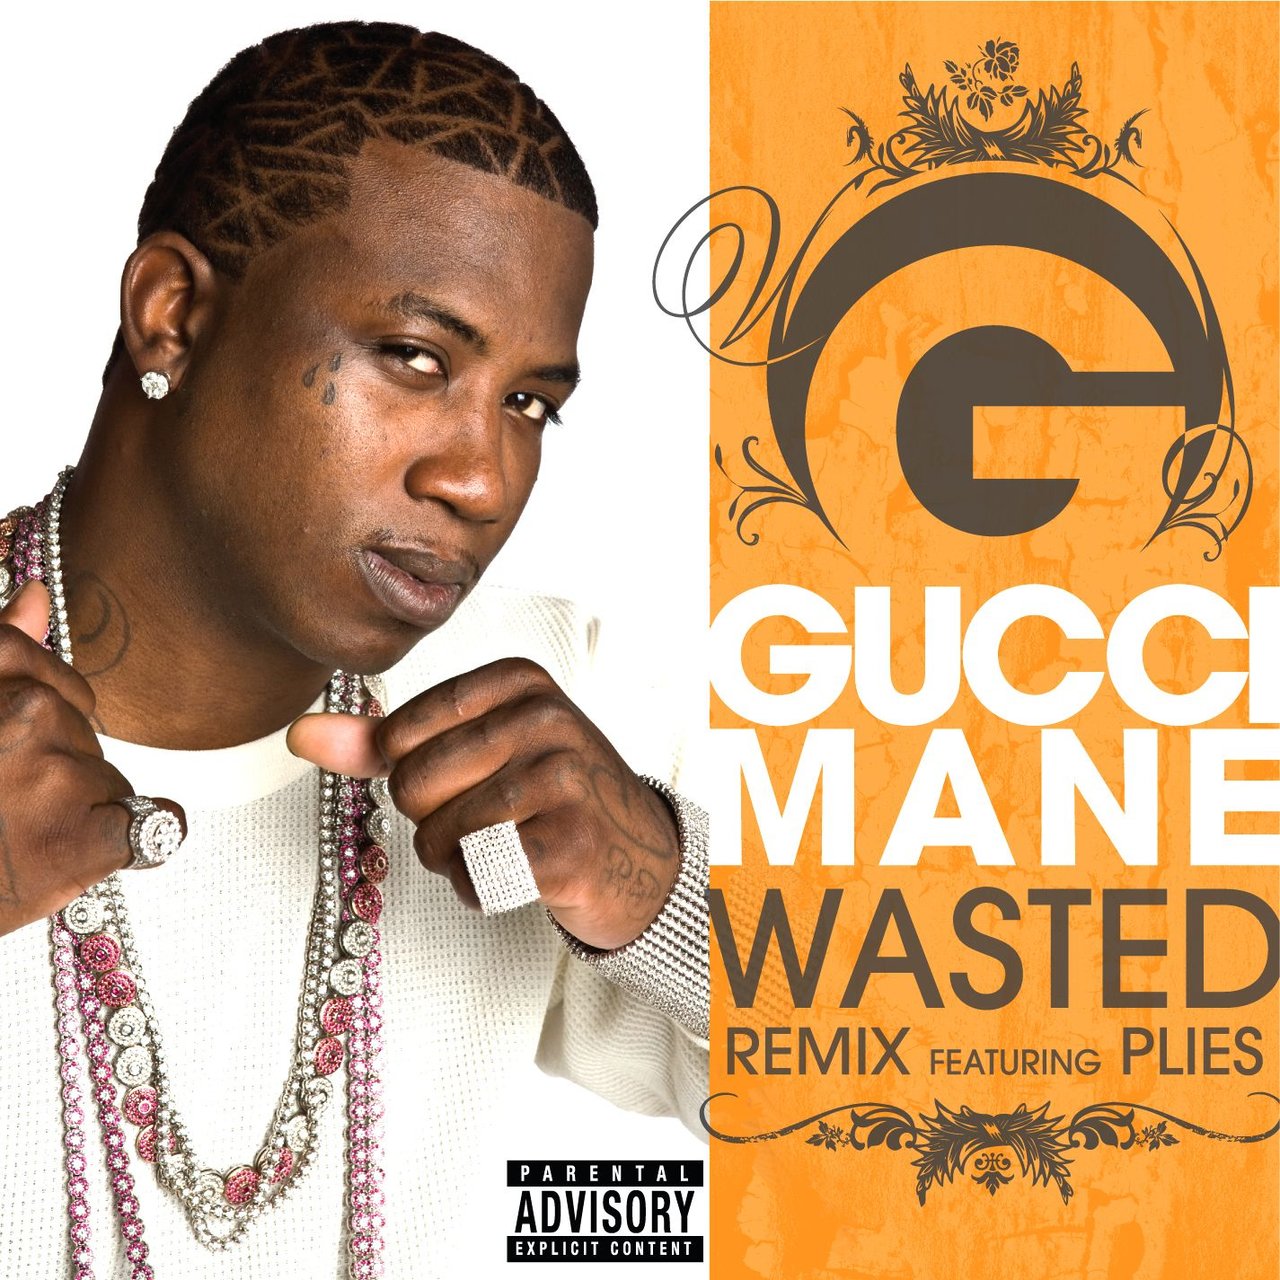 Wasted (feat. Plies) [Remix] [2009]